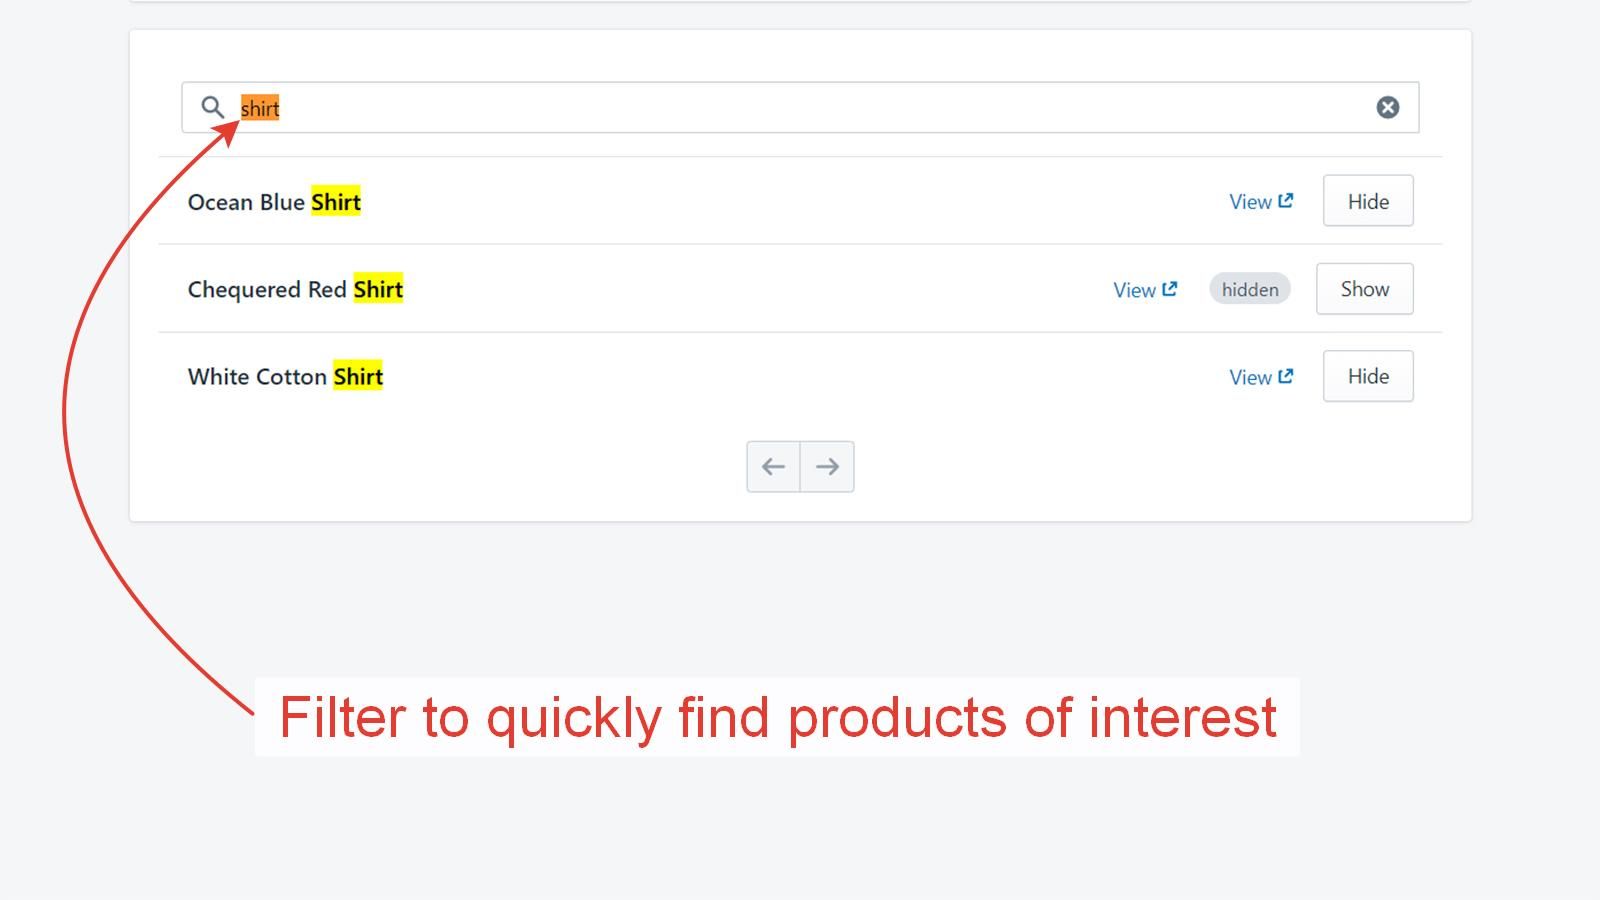 Filter to quickly find products of interest